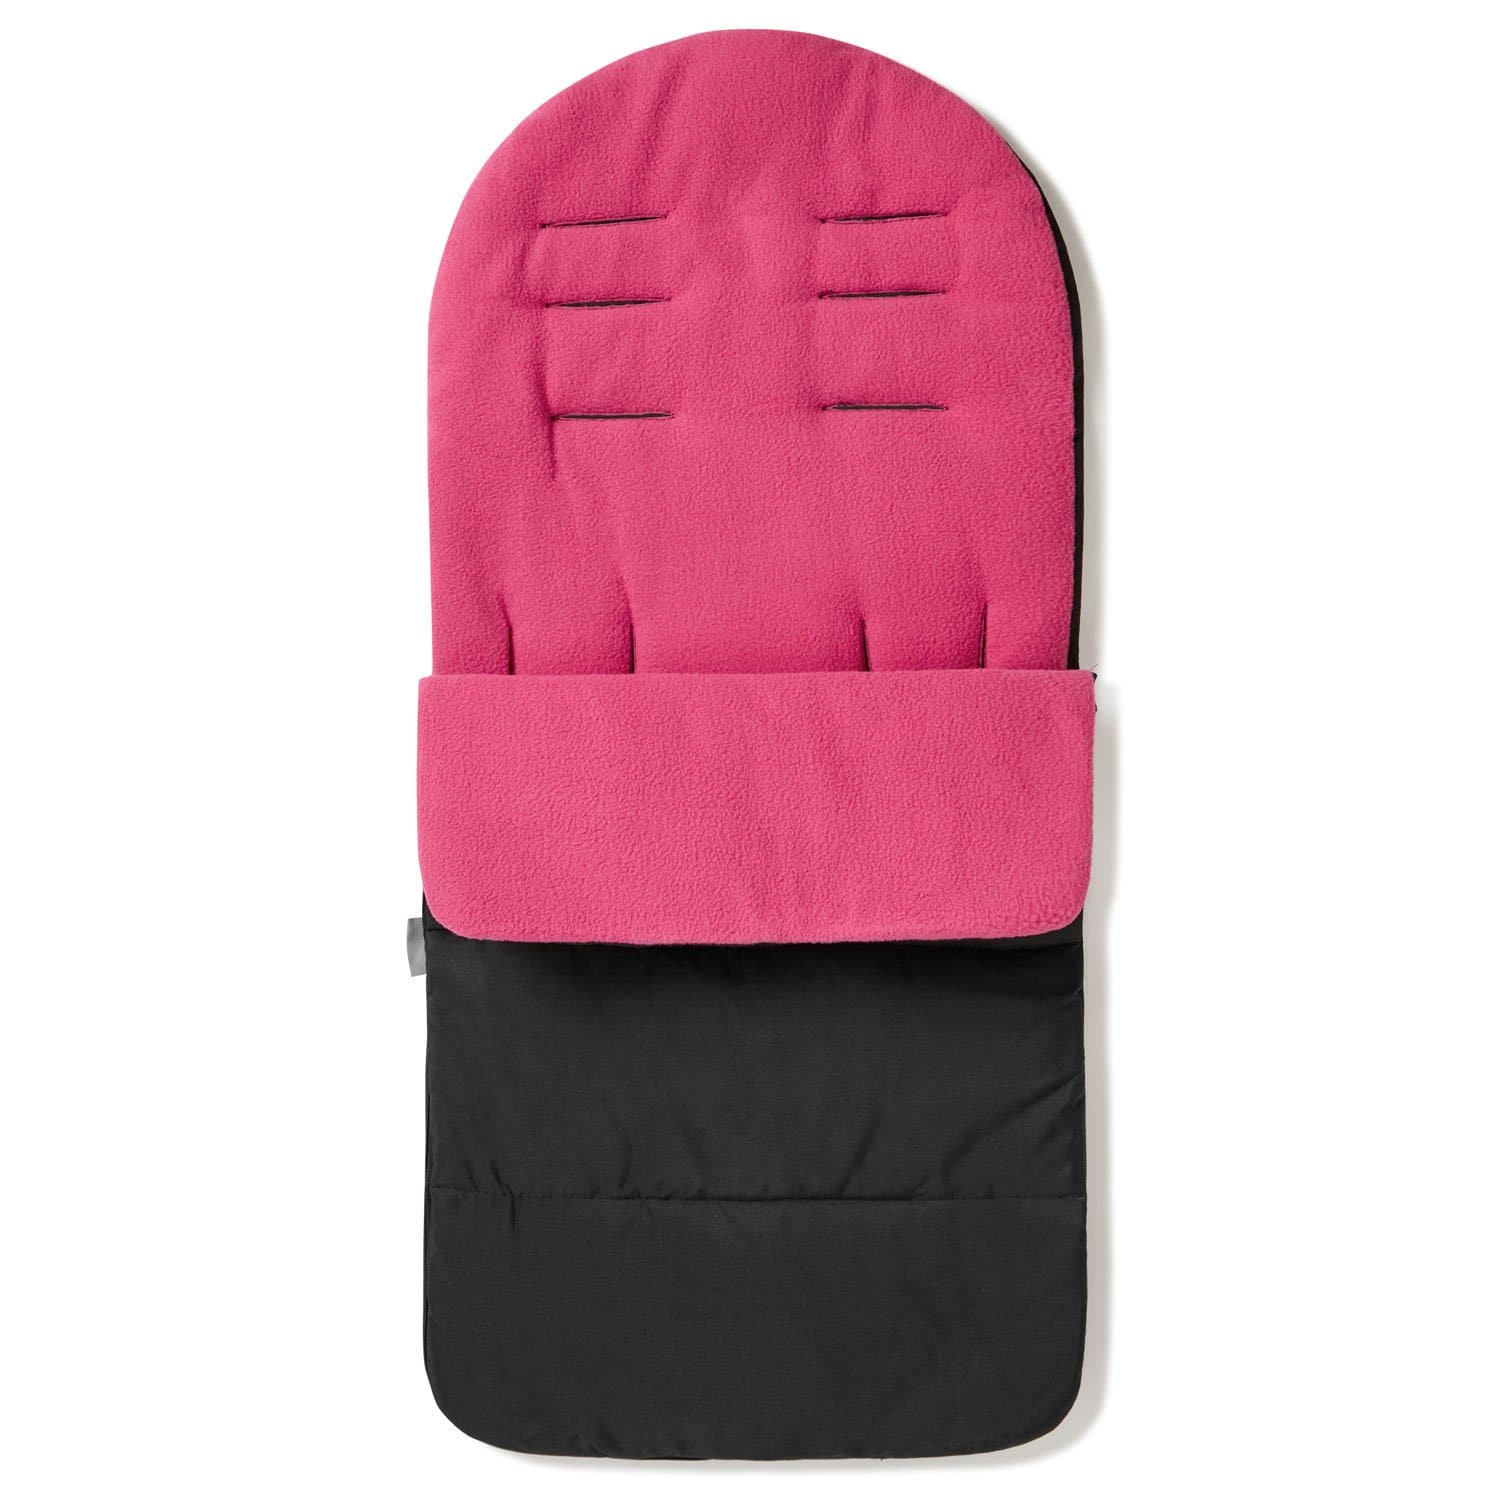 Premium Footmuff / Cosy Toes Compatible with Chicco - Pink Rose / Fits All Models | For Your Little One